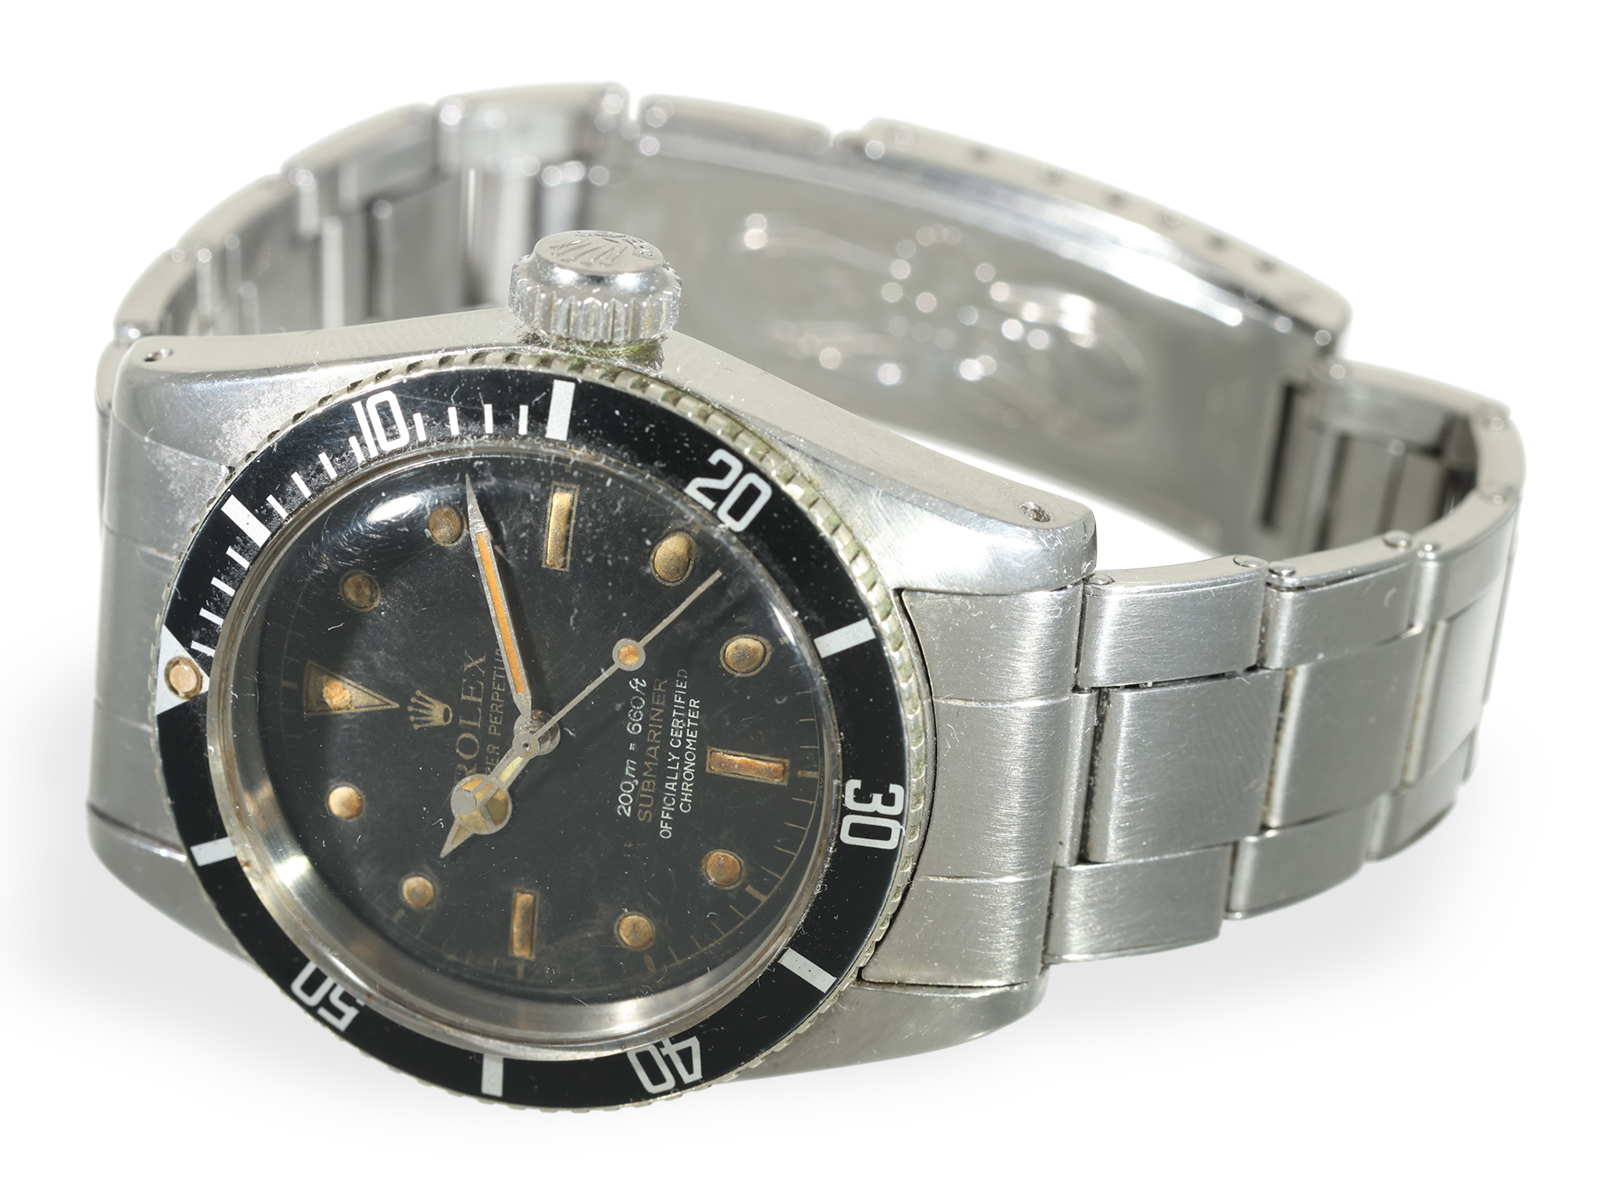 Wristwatch: extremely rare Rolex Submariner Ref. 6538 Big Crown-Four Liner, ca. 1958 - Image 2 of 9